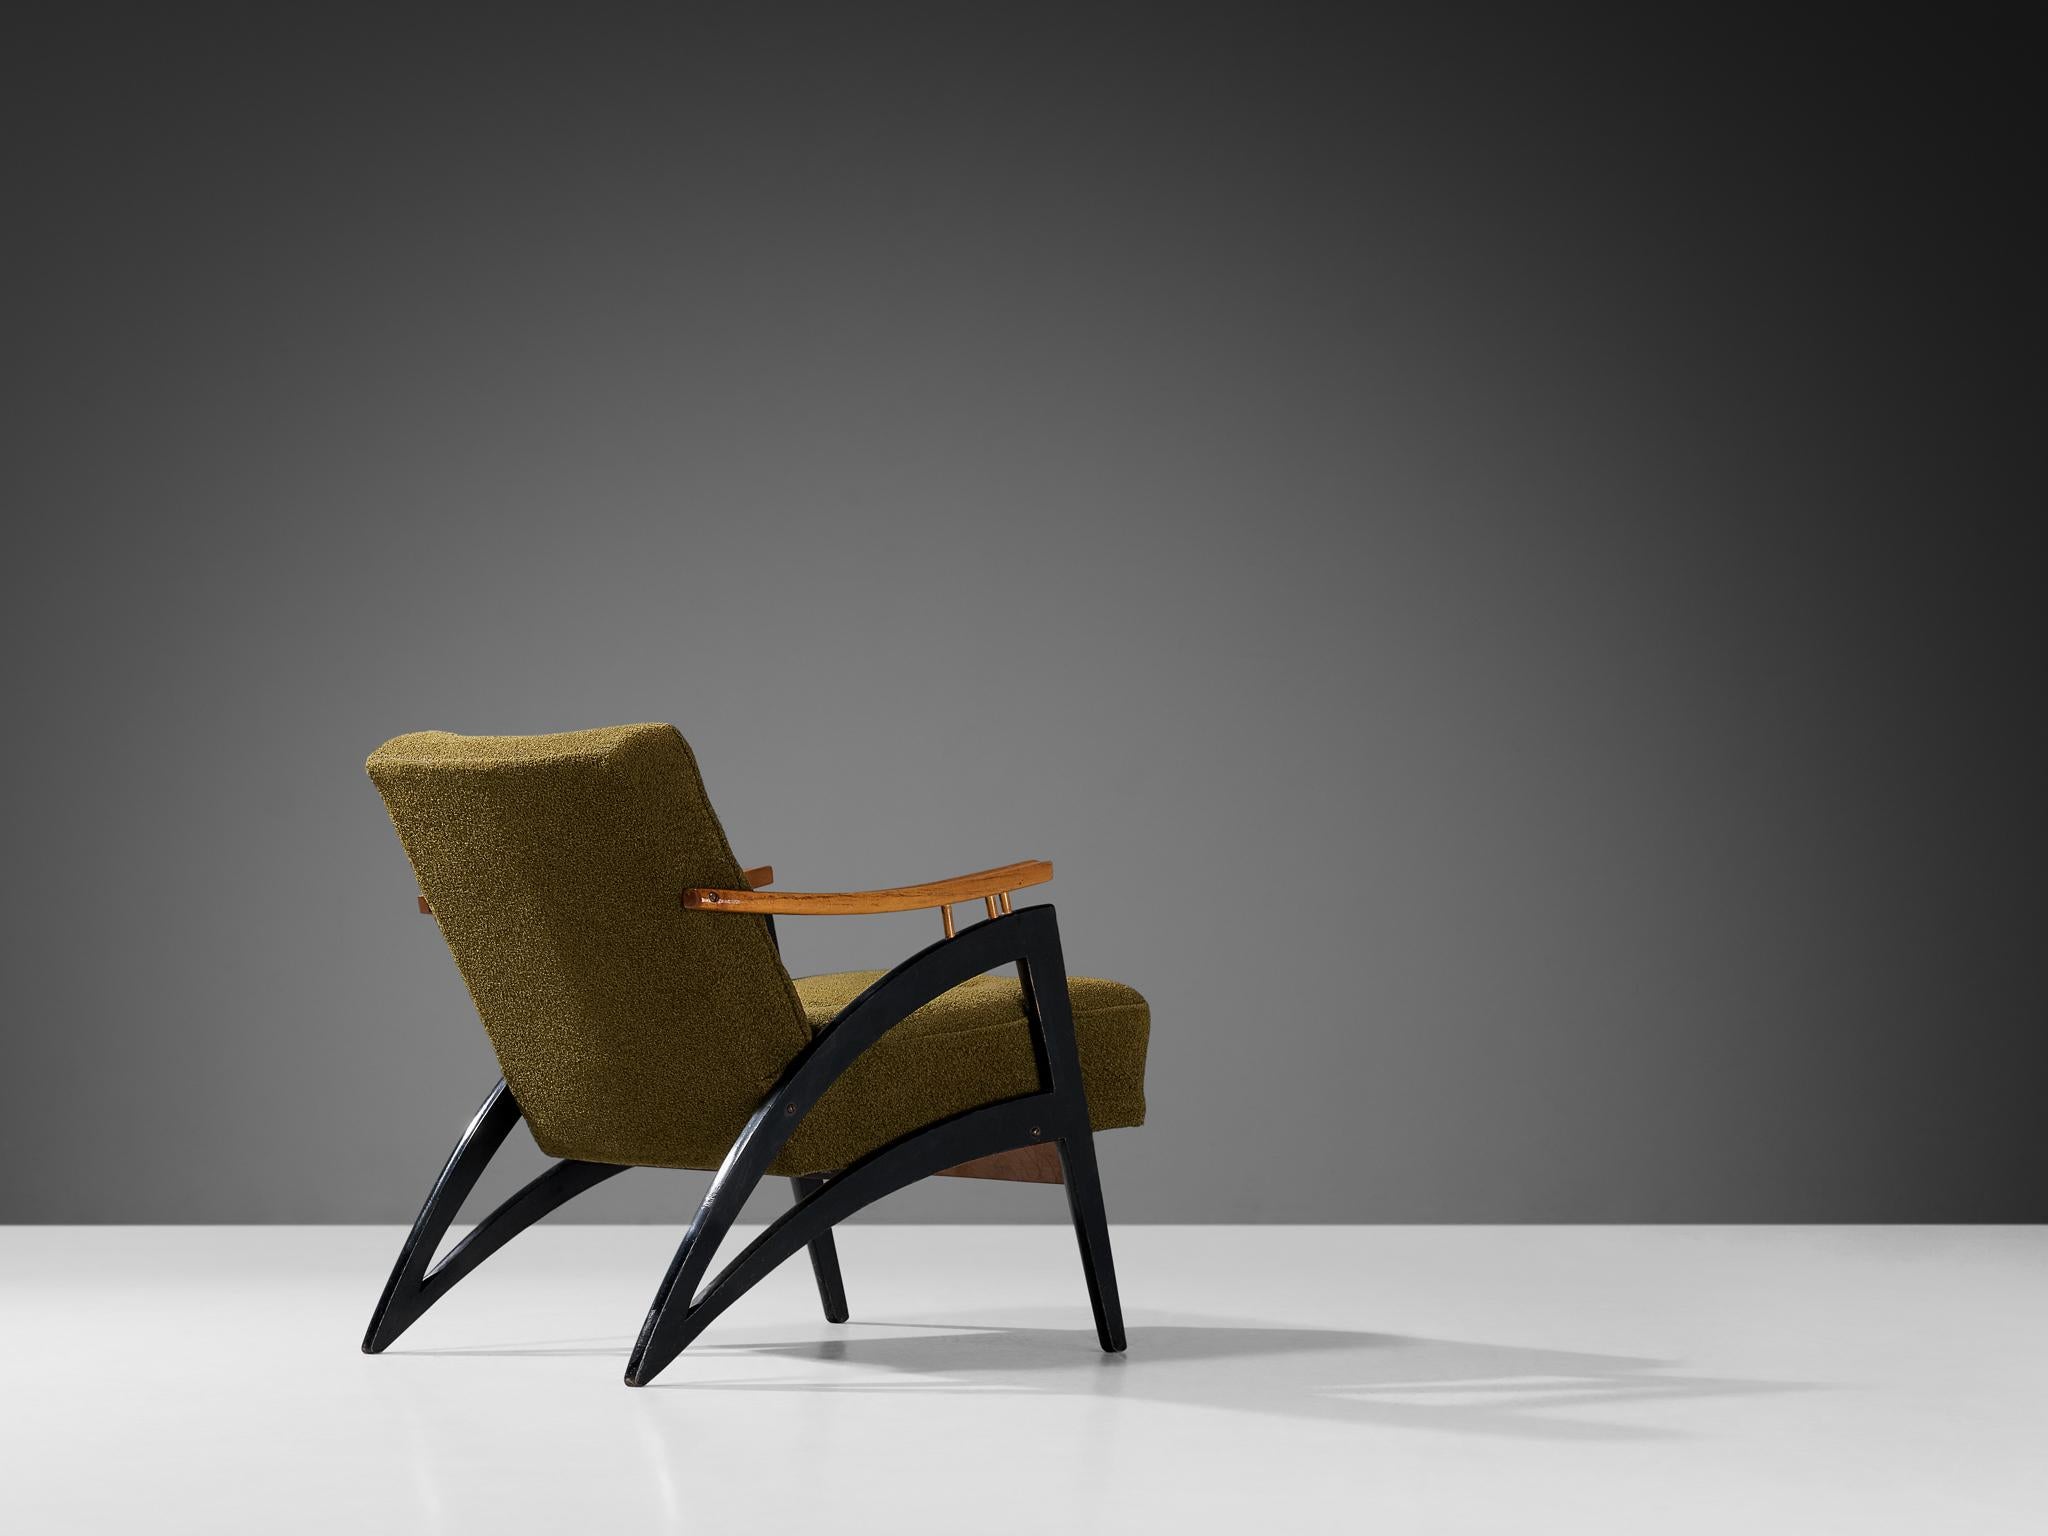 Lounge chair, birch, lacquered wood, fabric, Italy, 1960s.

Well-shaped Italian lounge chair in an olive green upholstery. The lower part of the legs are in a sharp V shape and executed in black lacquered wood. The armrests are made from birch wood.